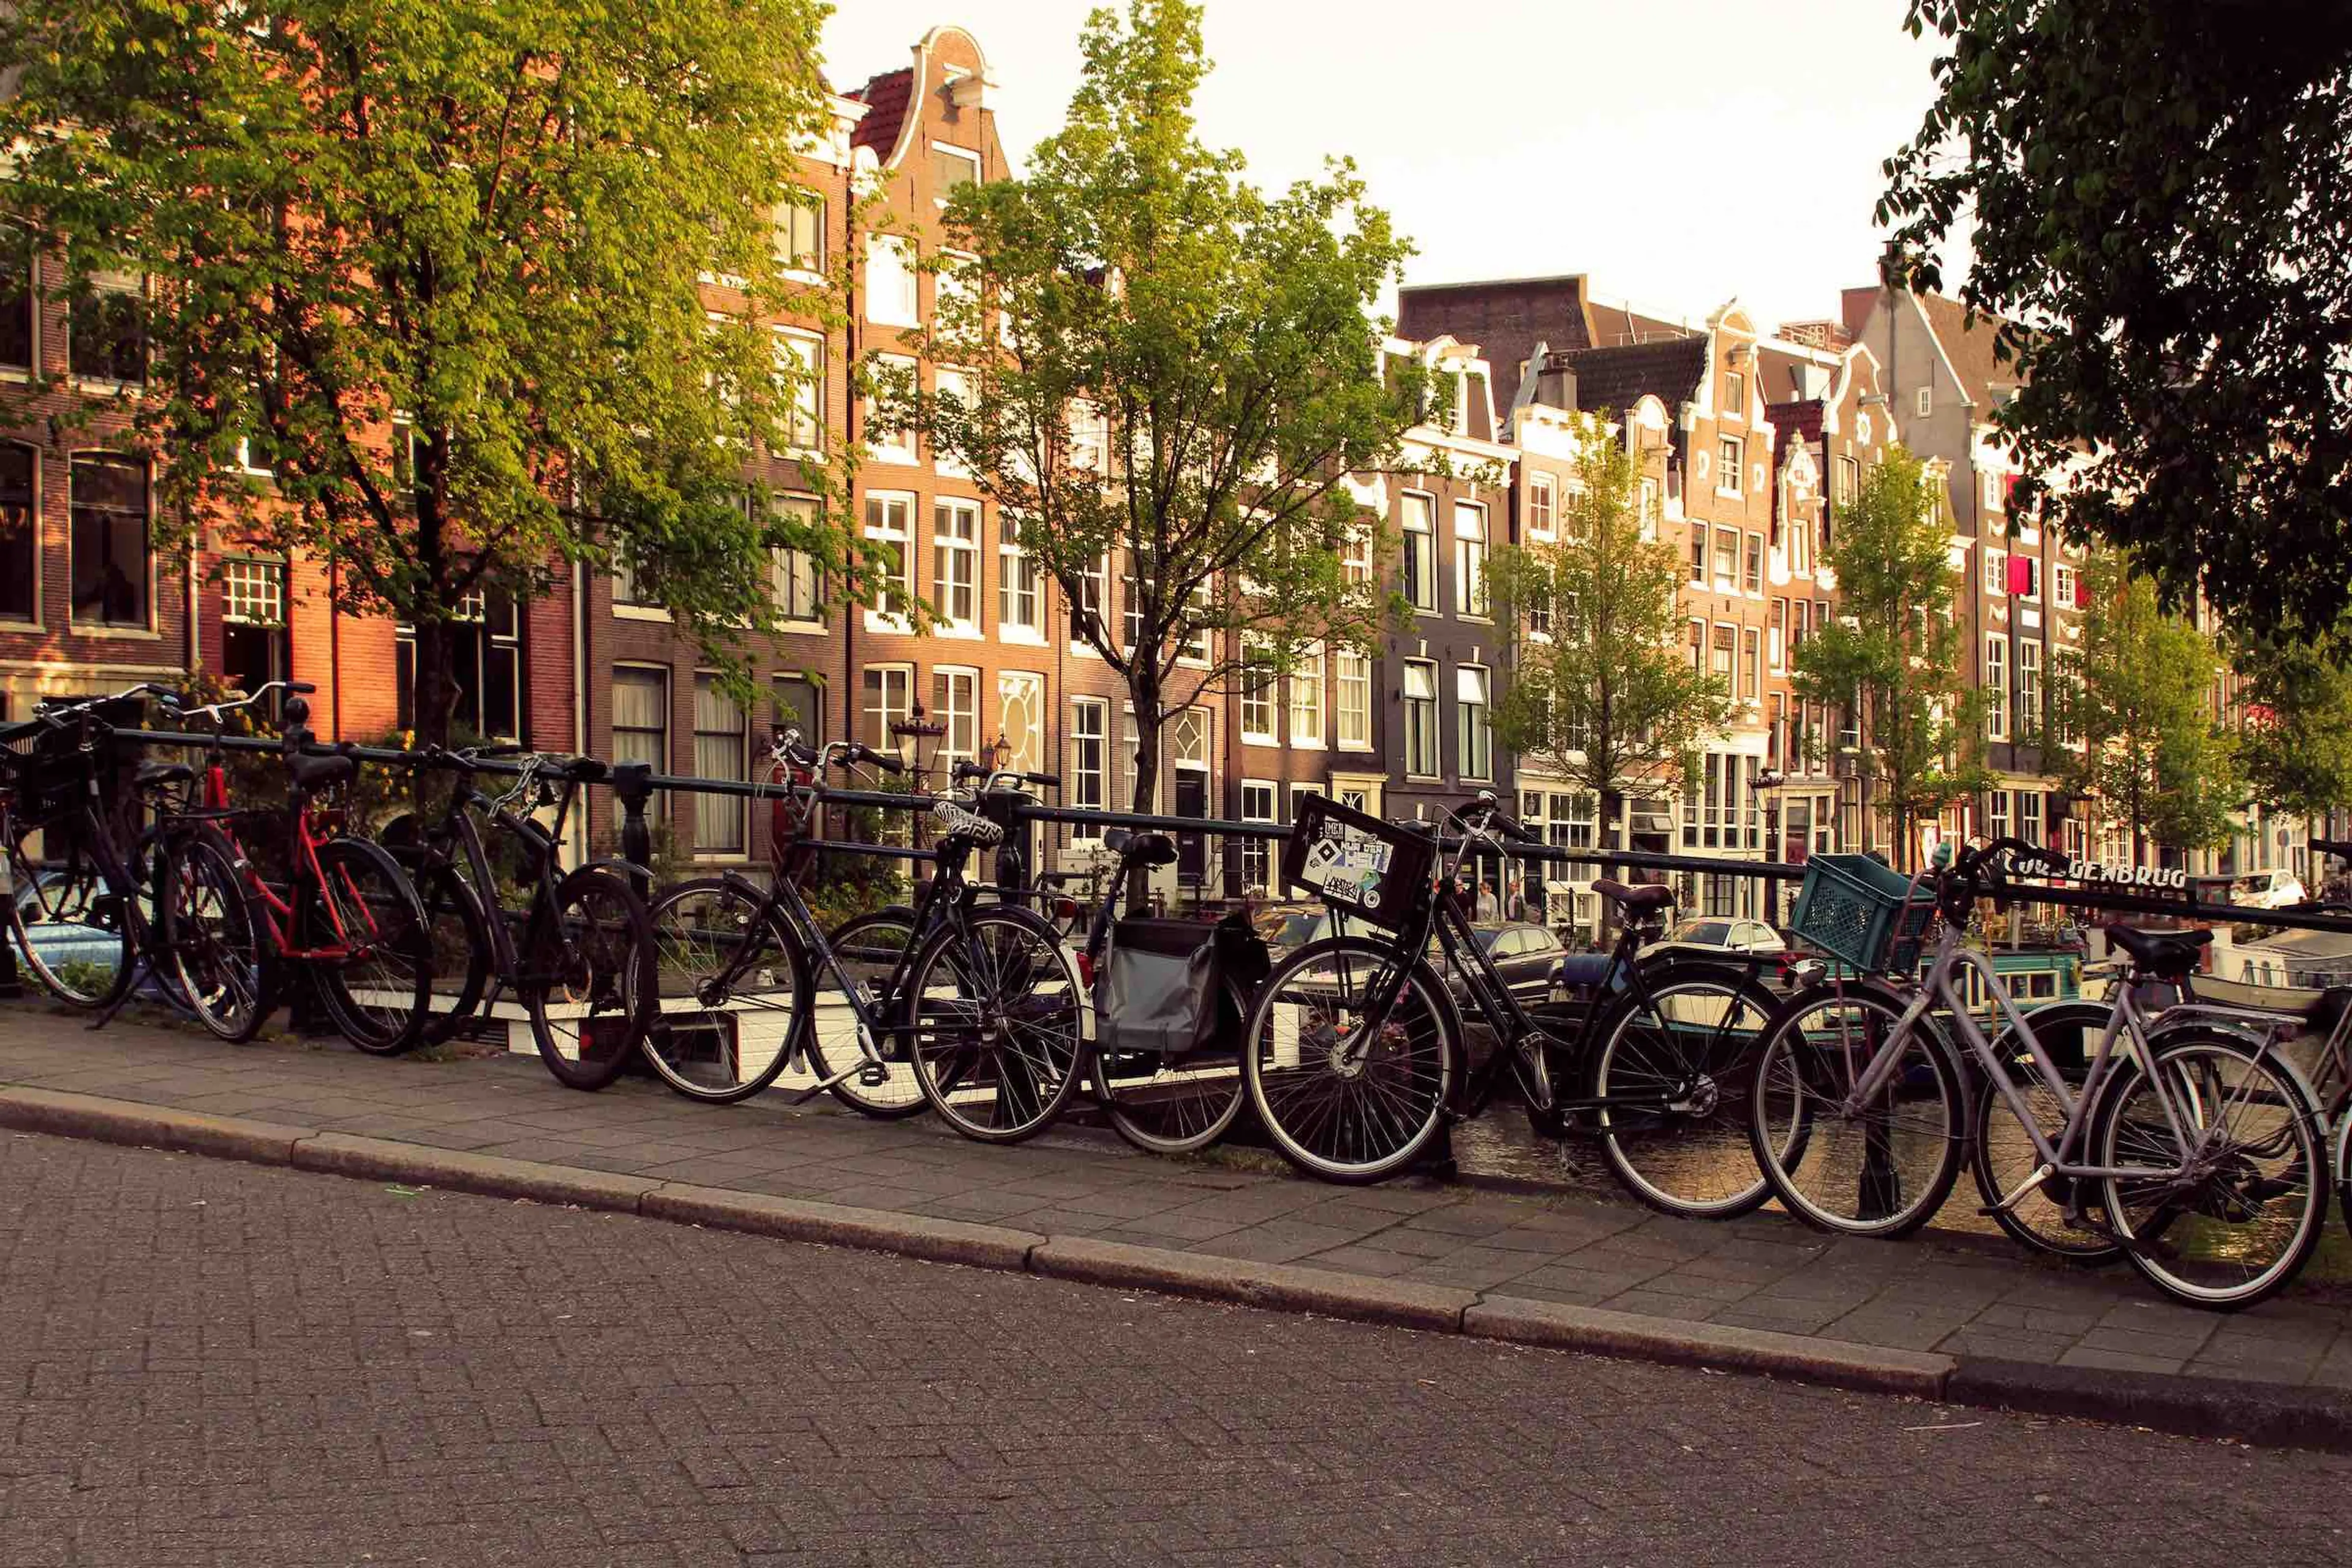 Bicycle is the most selected transportation vehicle in Netherlands